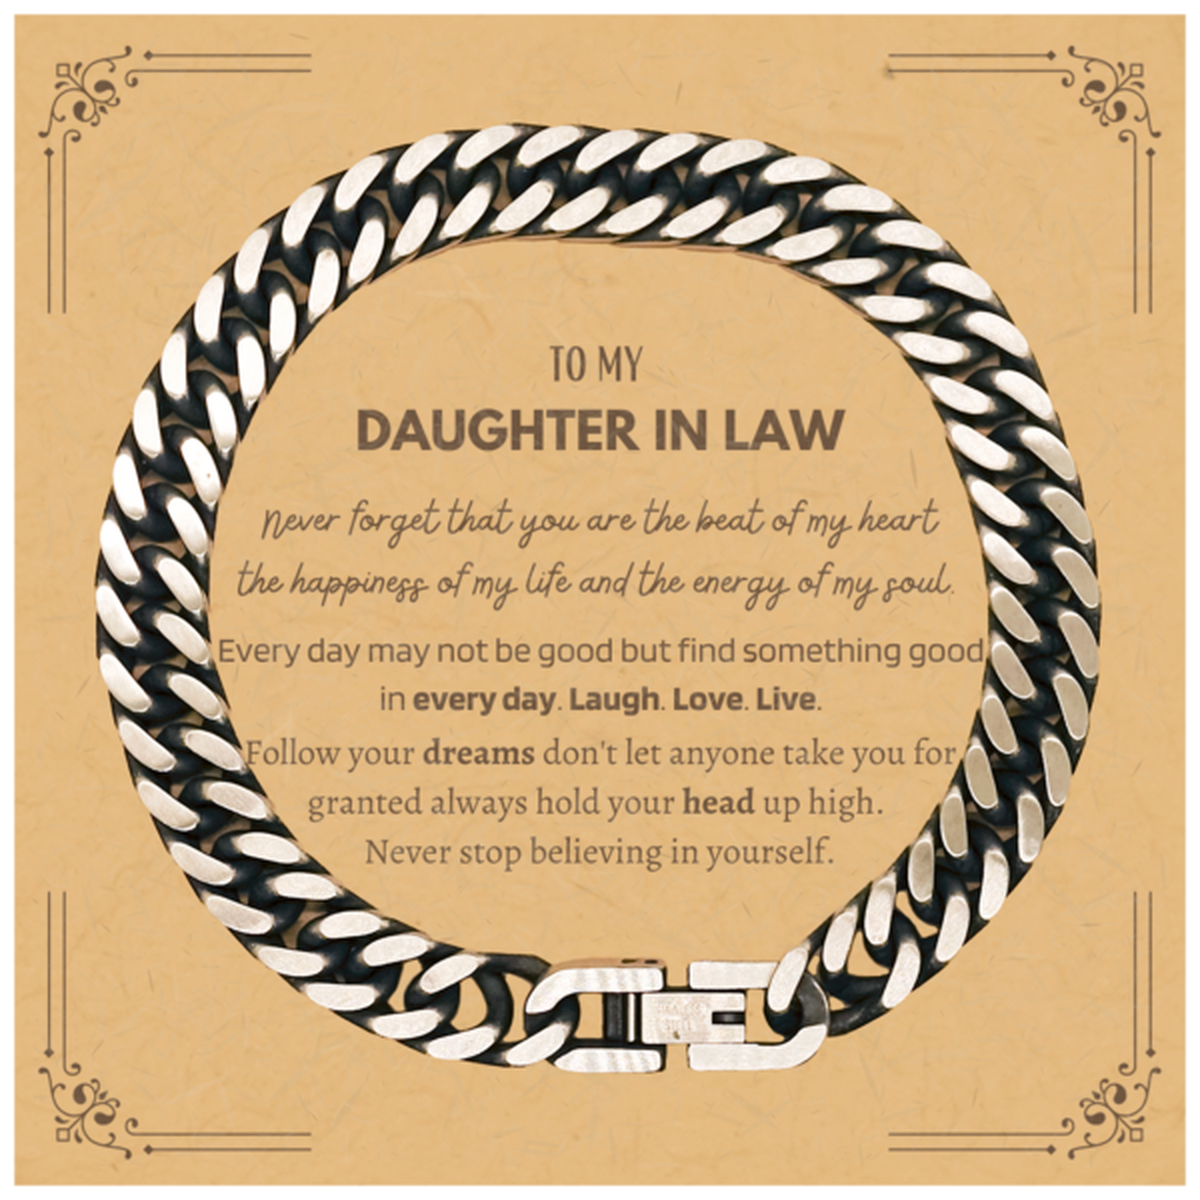 To My Daughter In Law Message Card Gifts, Christmas Daughter In Law Cuban Link Chain Bracelet Present, Birthday Unique Motivational For Daughter In Law, To My Daughter In Law Never forget that you are the beat of my heart the happiness of my life and the